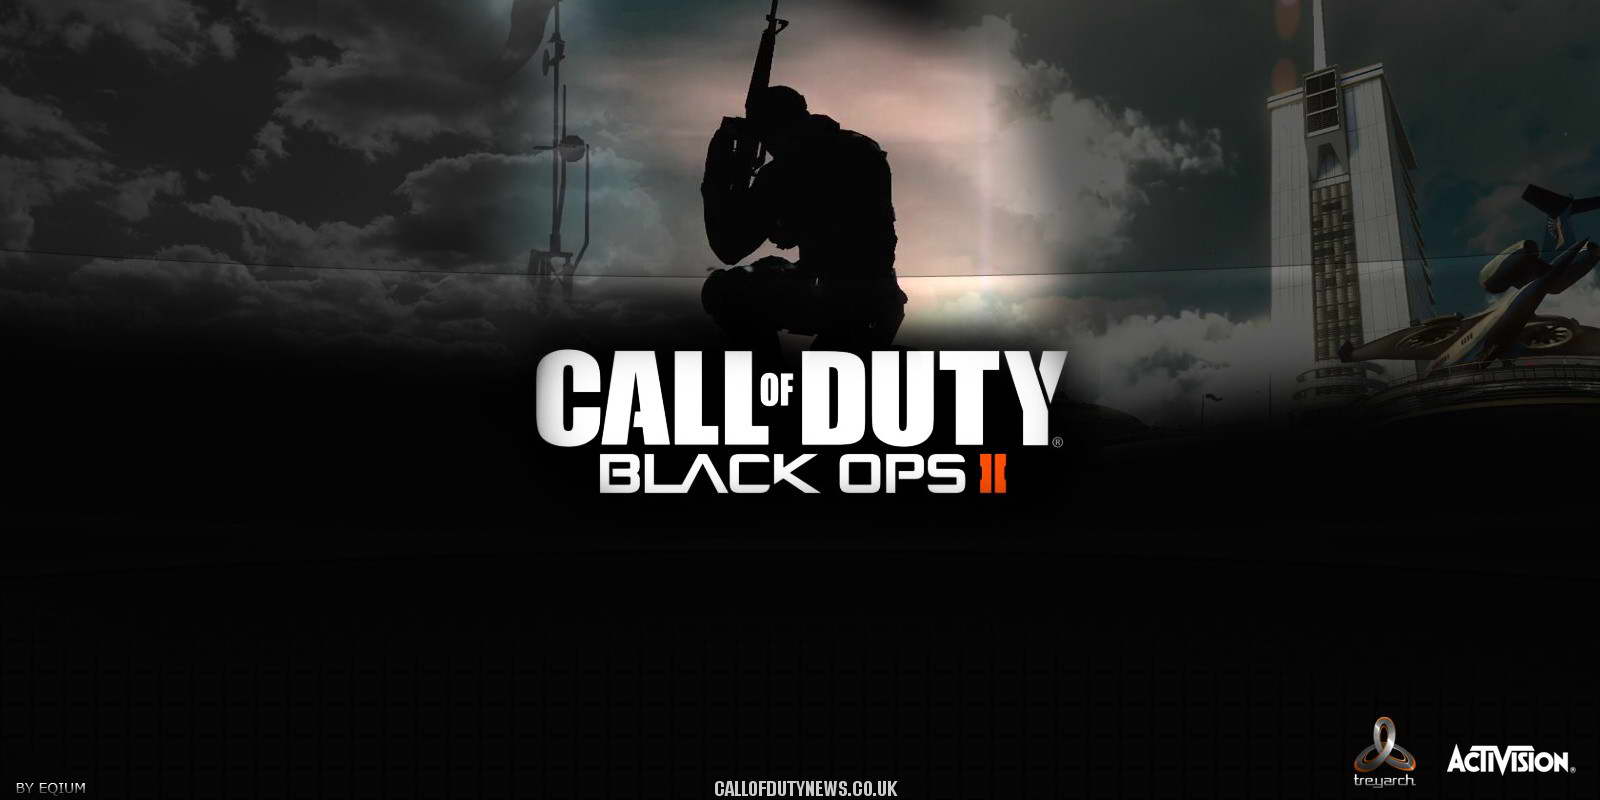 Free download call of duty black ops 2 wallpaper call of duty black ops 2 wallpaper [1600x800] for your Desktop, Mobile & Tablet. Explore Call of Duty BO2 Wallpaper